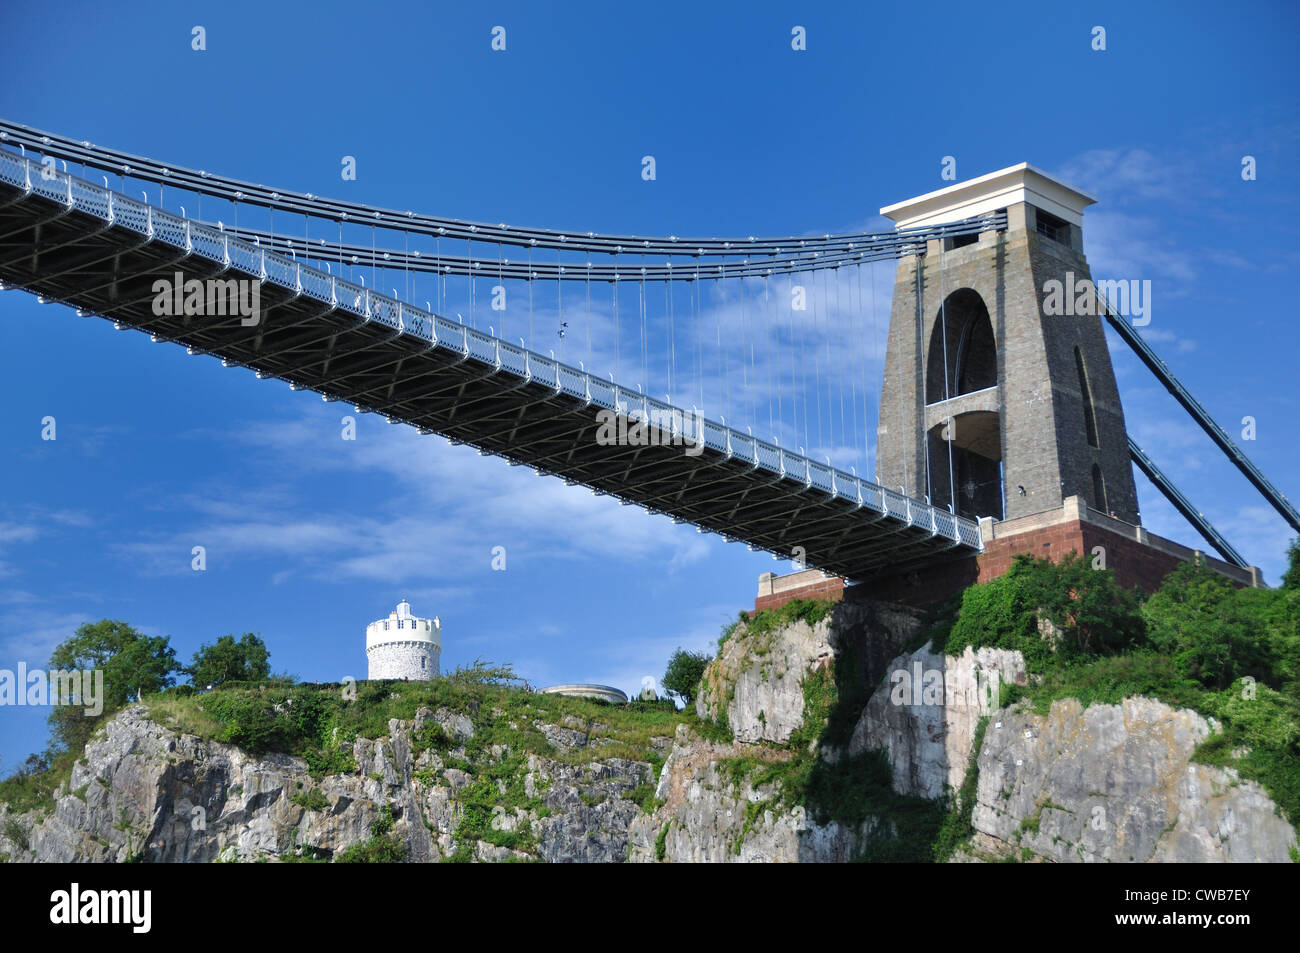 UK Clifton Suspension Bridge Photographed below From Cyclepath Stock Photo